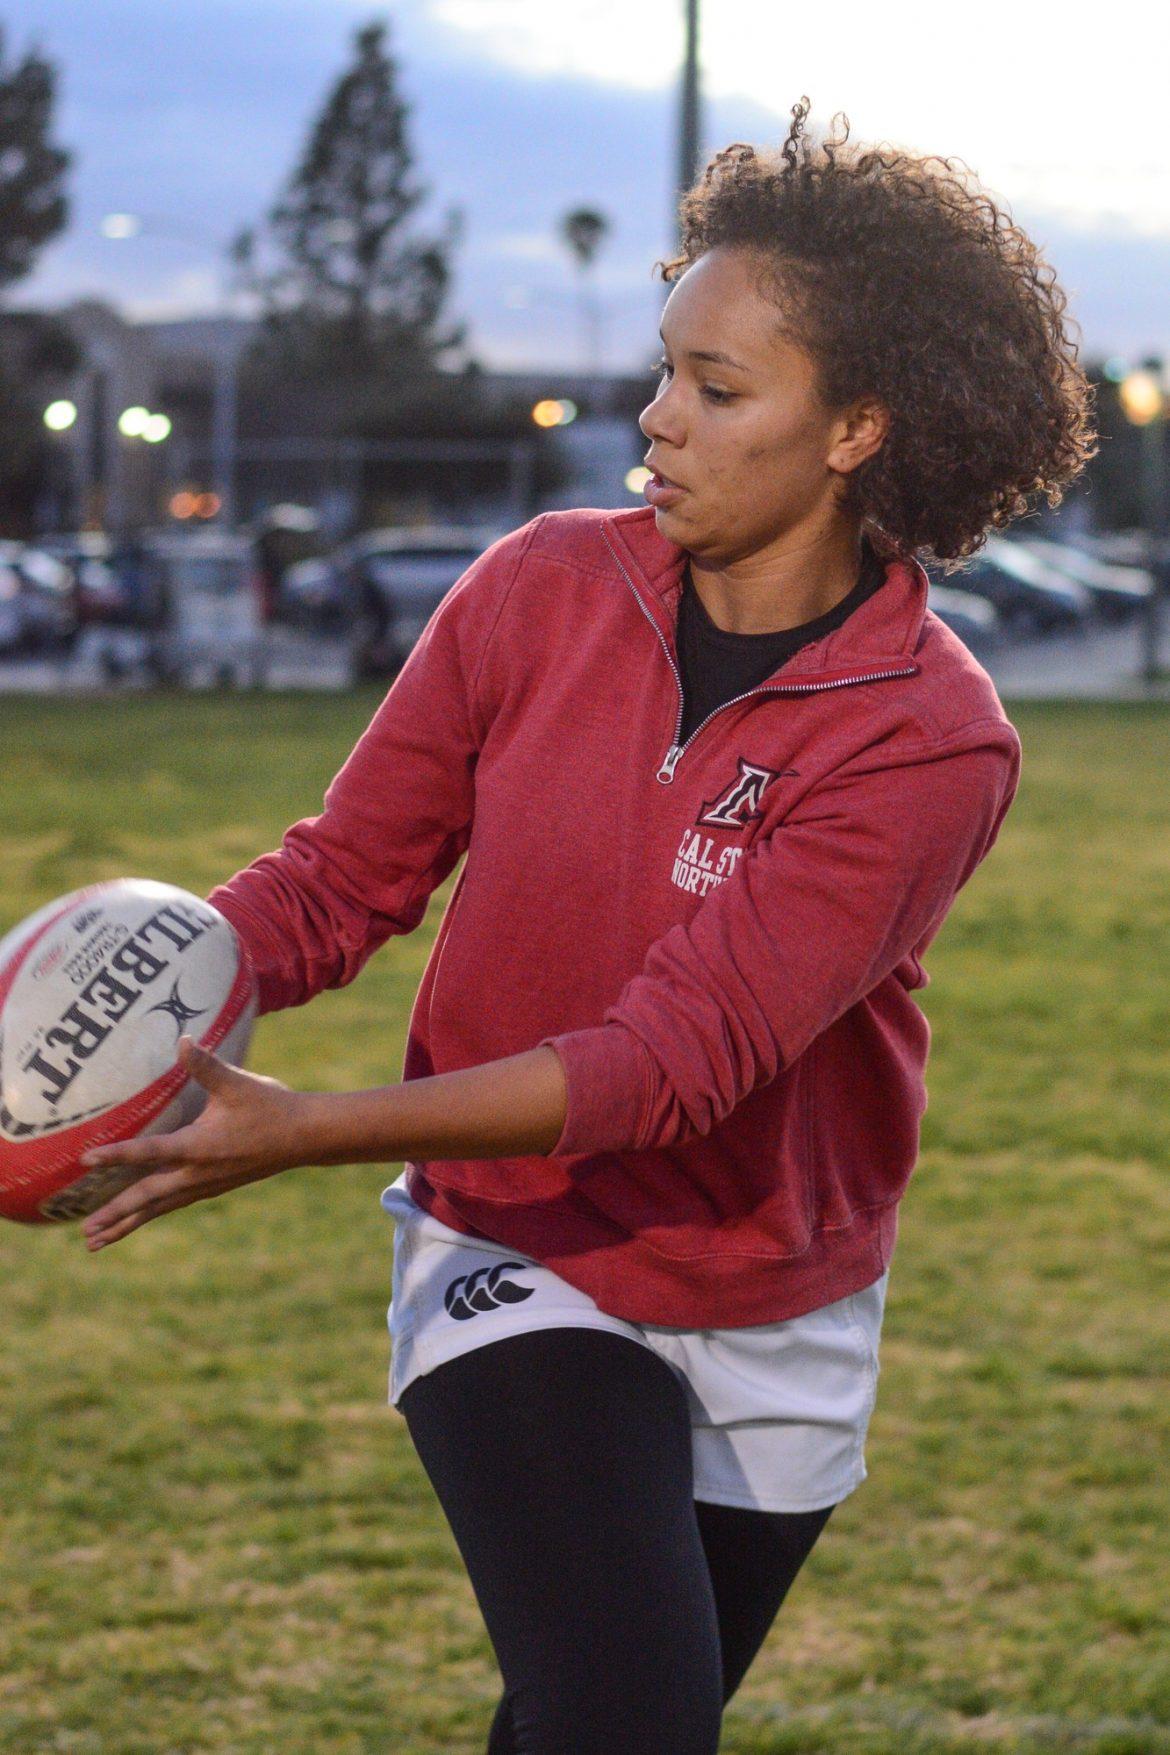 Senior Alyah Thomas is one of the leaders for CSUN women's rugby. Photo credit: Joshua Pacheco